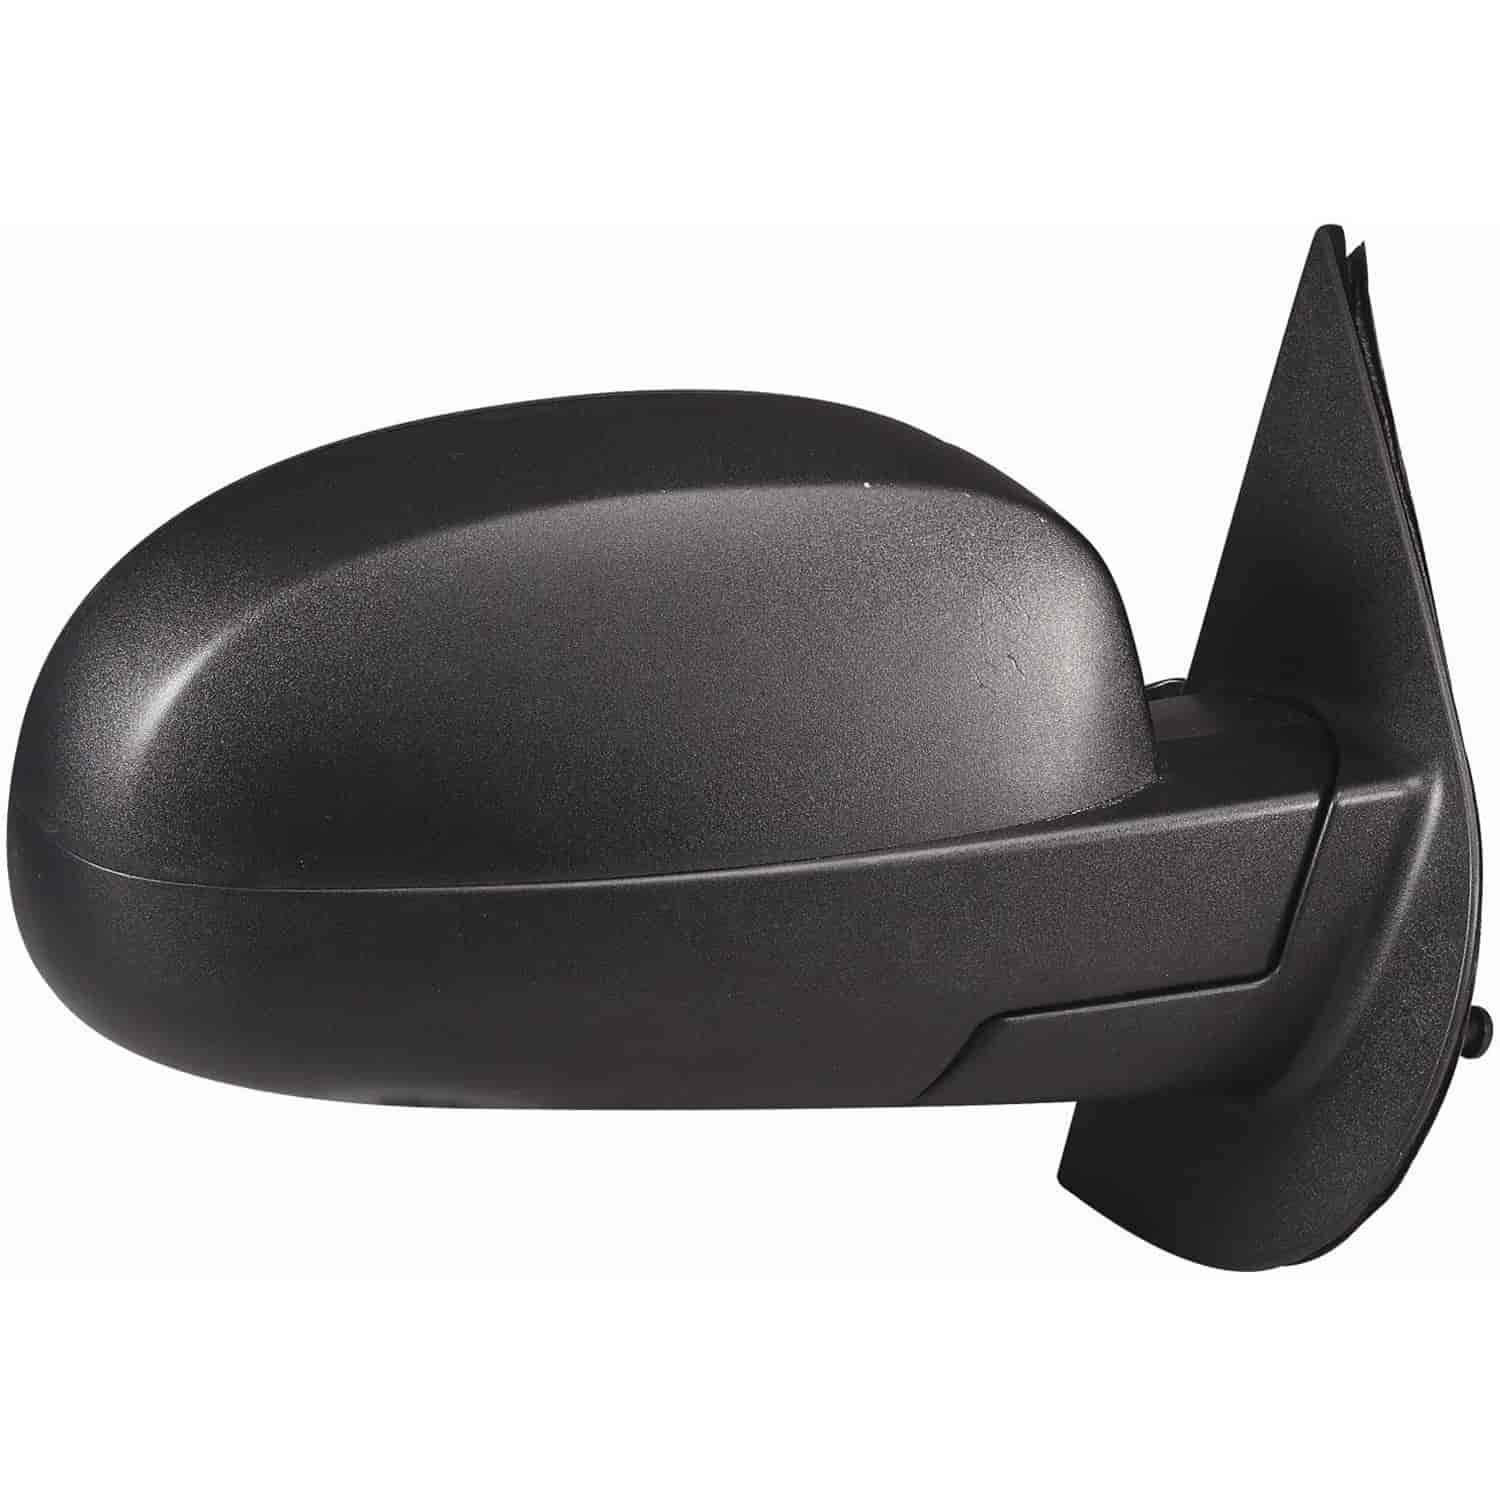 OEM Style Replacement Mirror Fits Chevy Avalanche, Silverado, Tahoe and Suburban